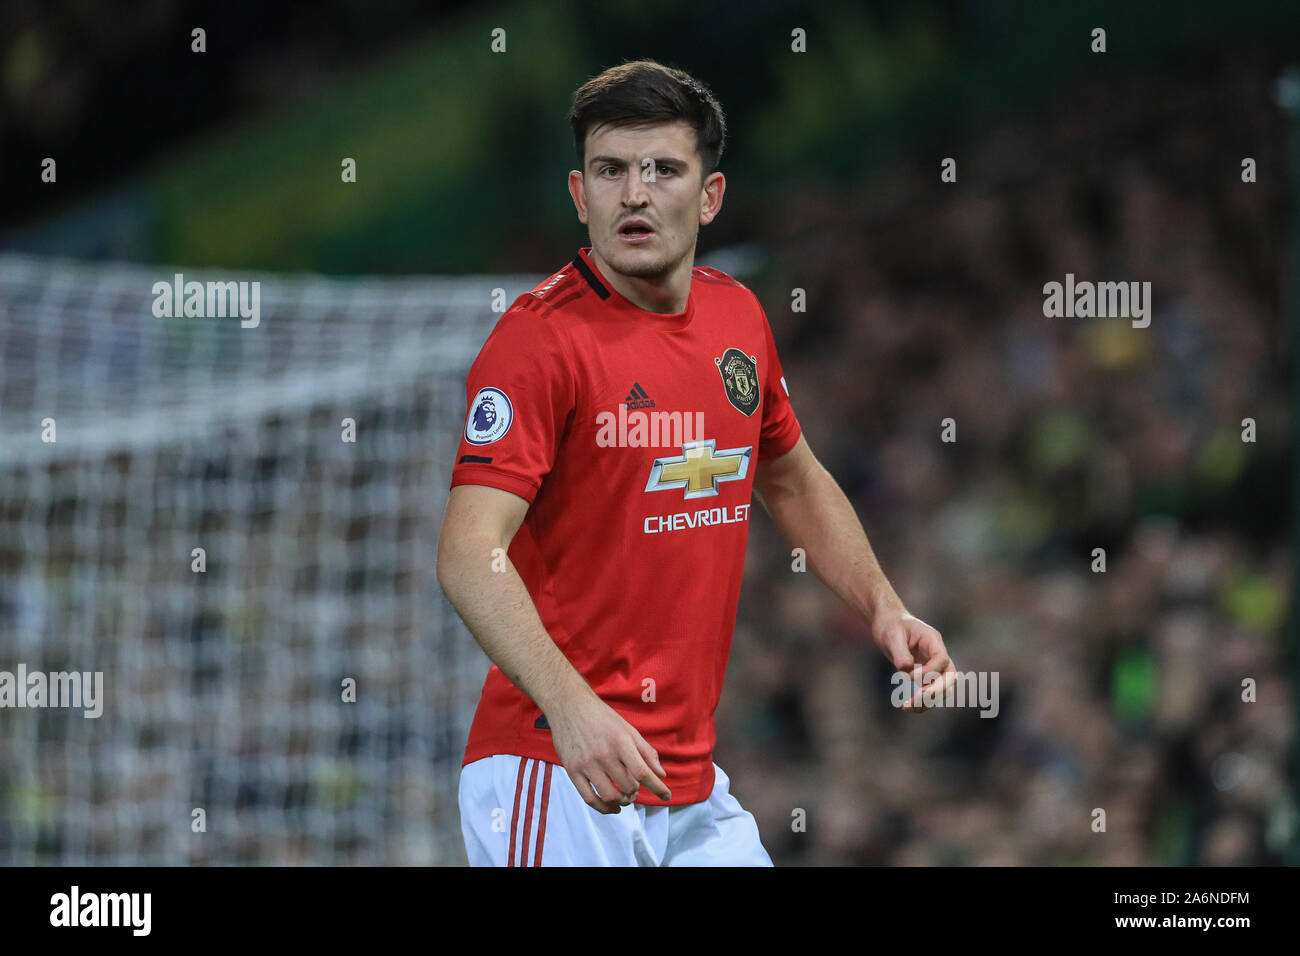 27th October 2019, Carrow Road, Norwich, England; Premier League, Norwich City v Manchester United : Harry Maguire (5) of Manchester United during the game Credit: Mark Cosgrove/News Images Stock Photo